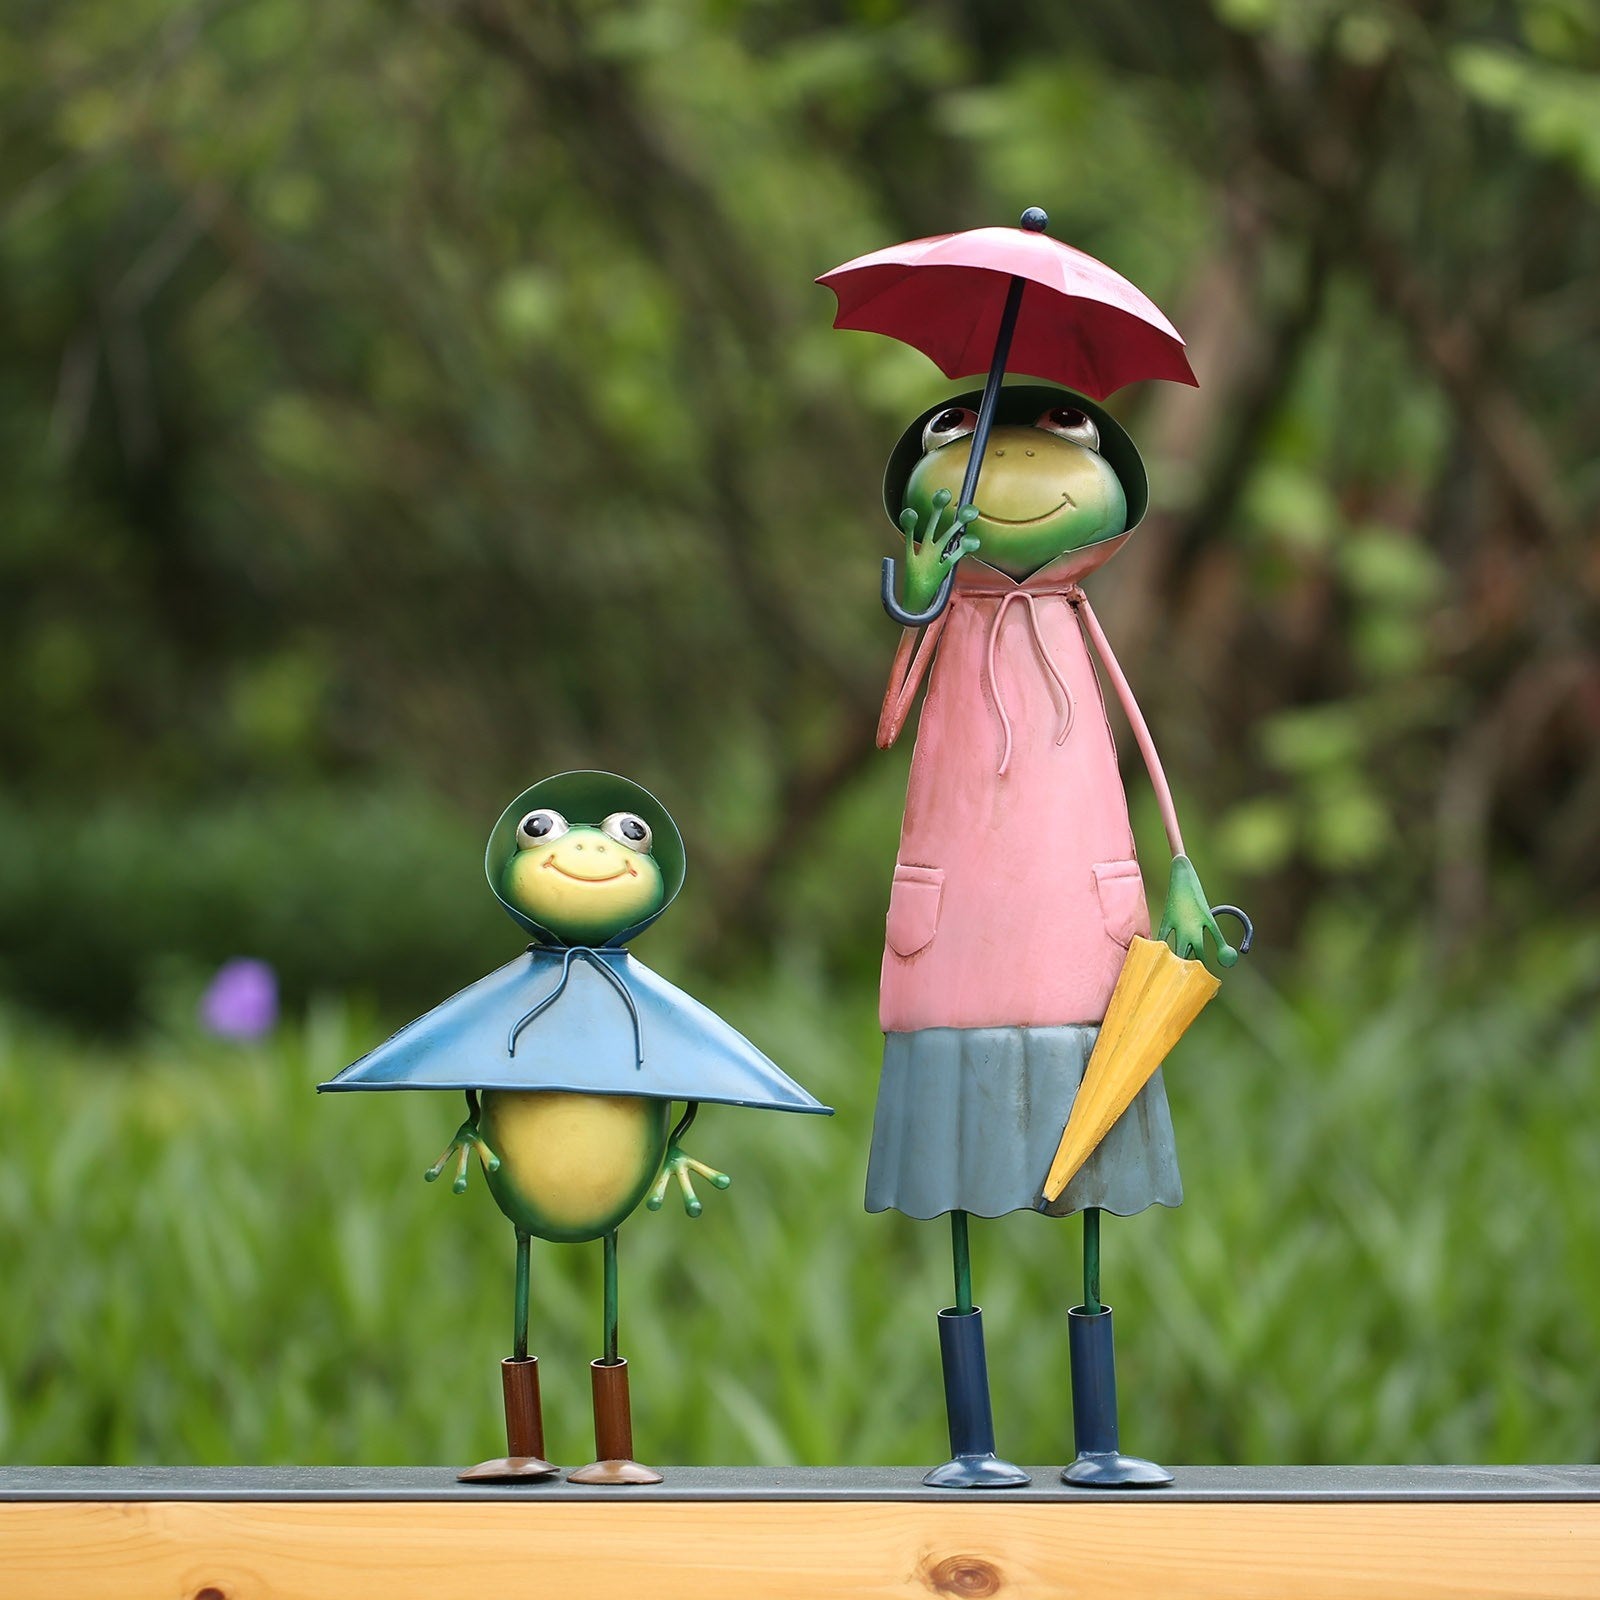 Funniest frog ornament figurine with an umbrella you've ever seen!